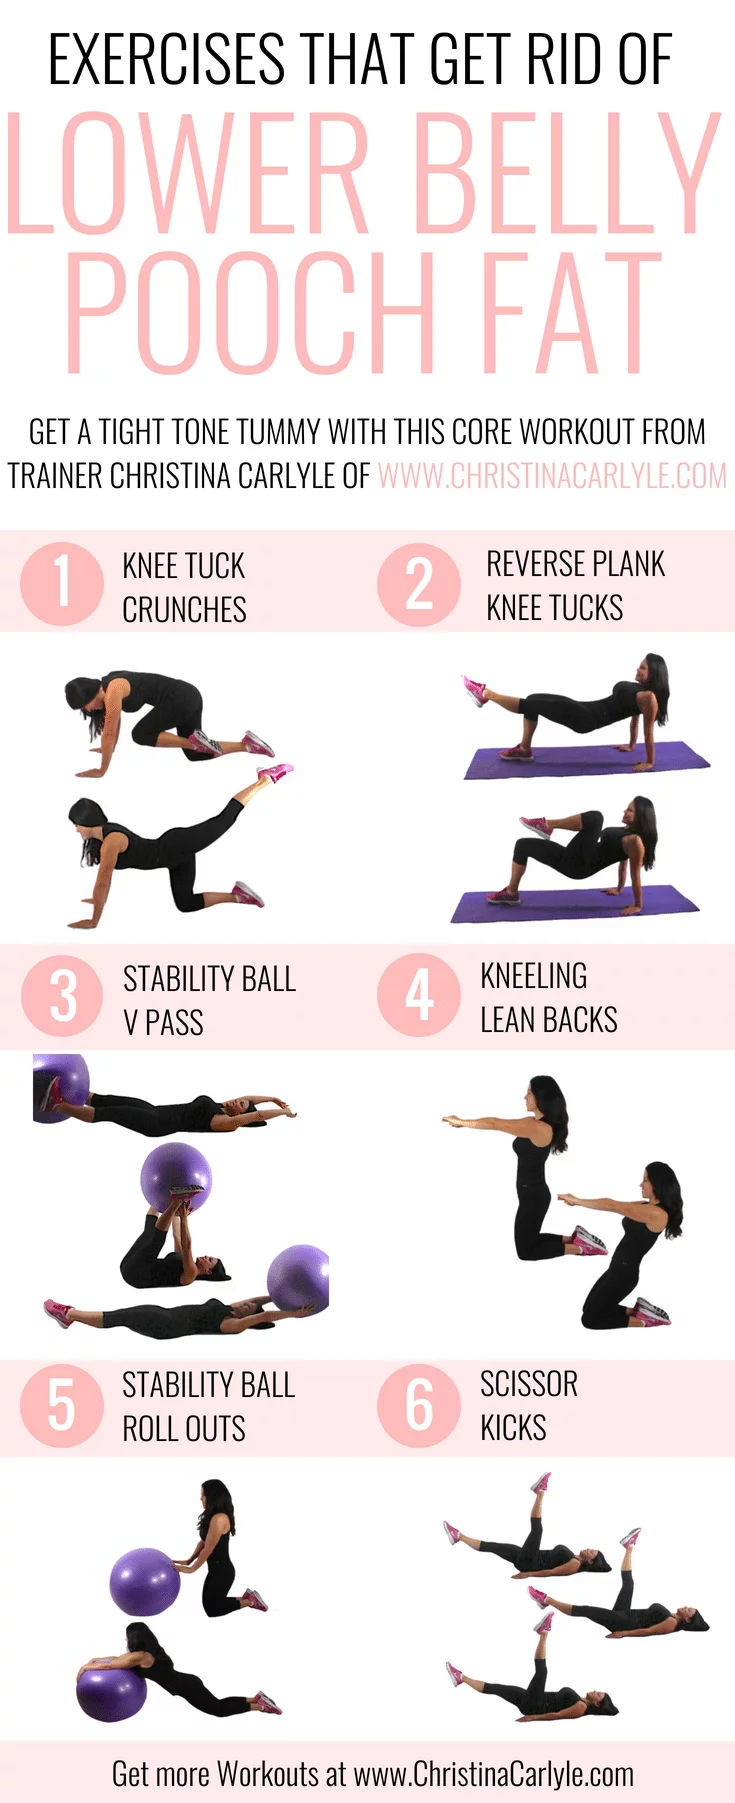 https://www.christinacarlyle.com/wp-content/uploads/2017/05/Exercises-that-get-rid-of-lower-belly-fat-Christina-Carlyle.png